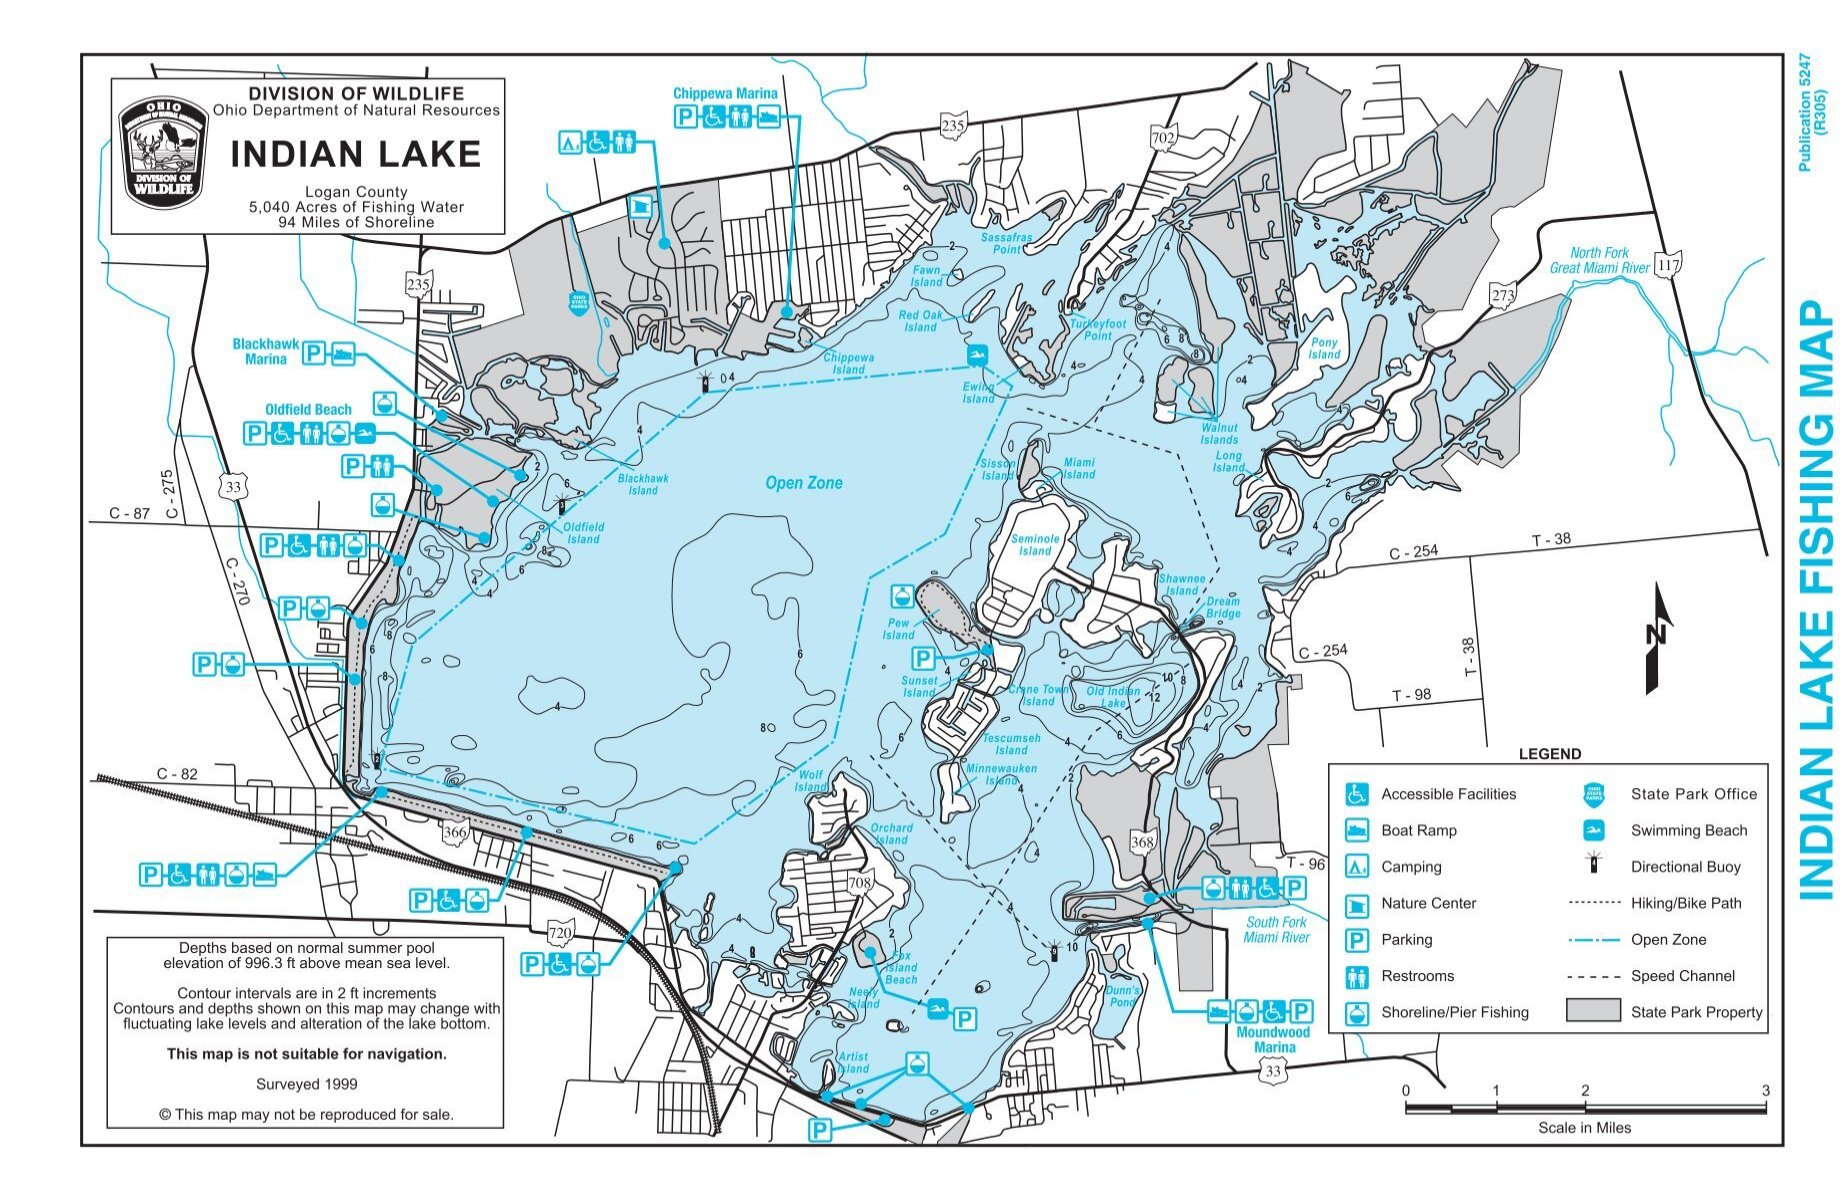 INDIAN LAKE FISHING MAP - Ohio Department of Natural Resources